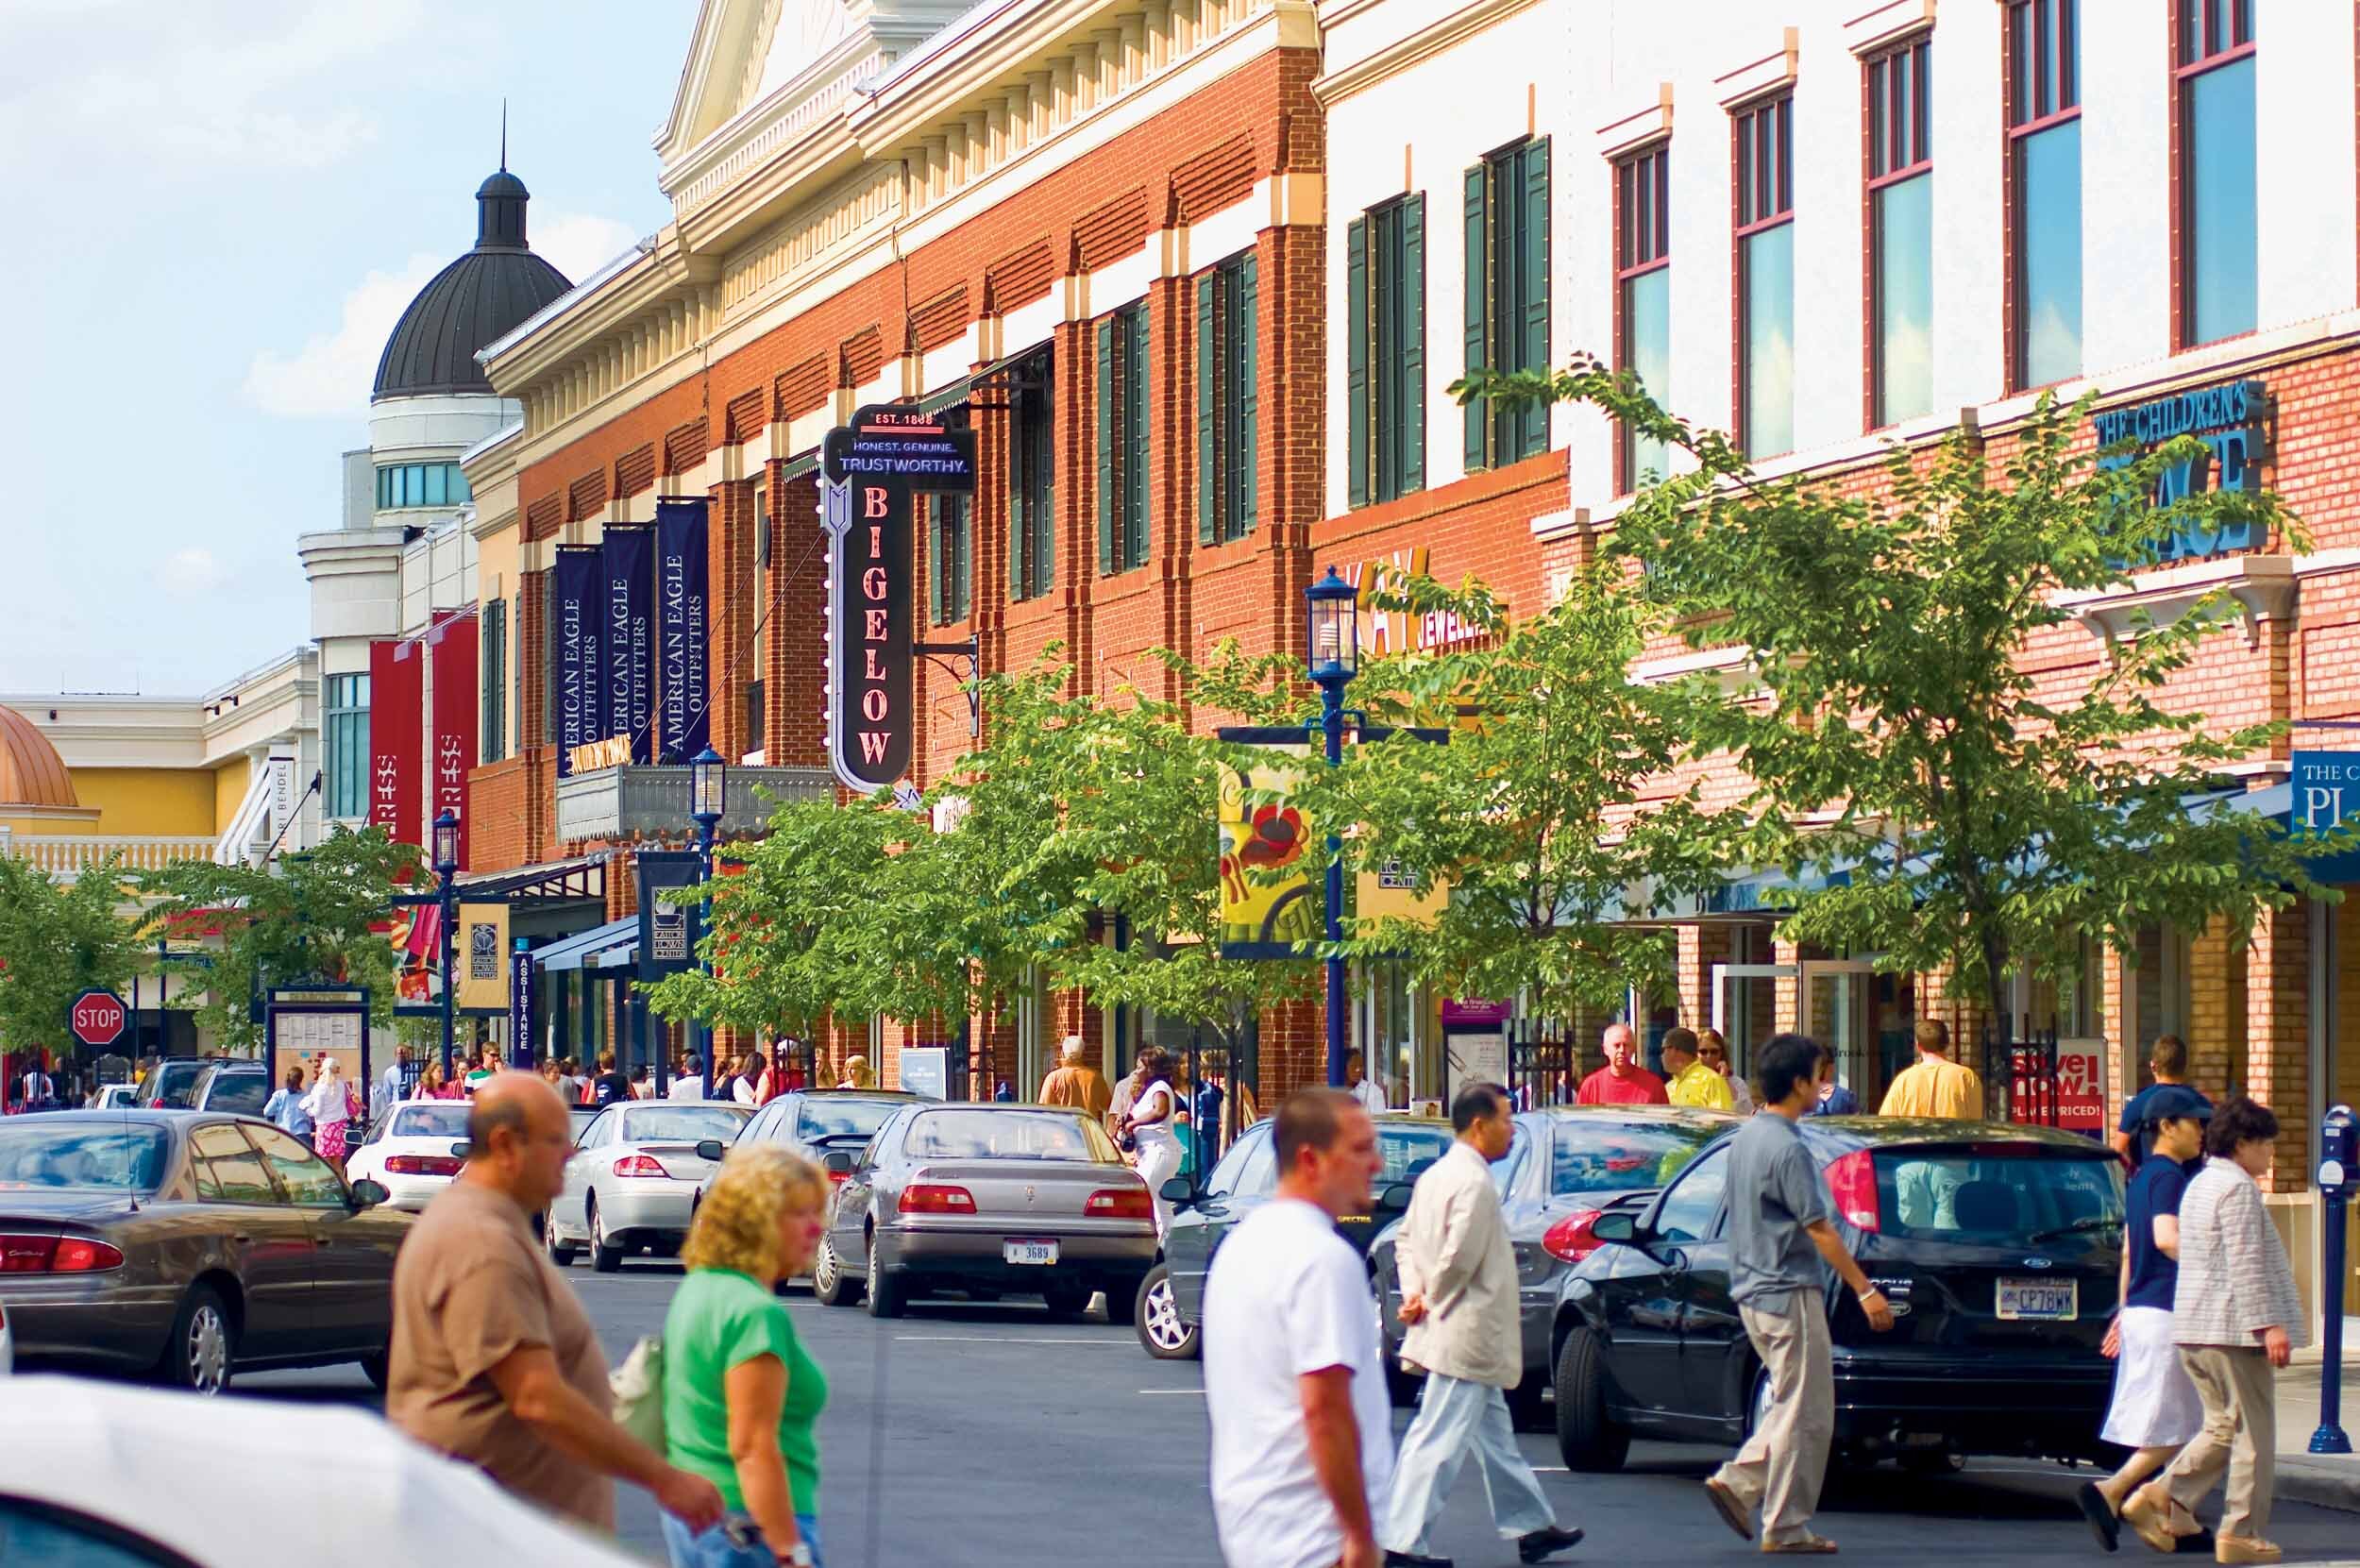 Our Story, Easton Town Center